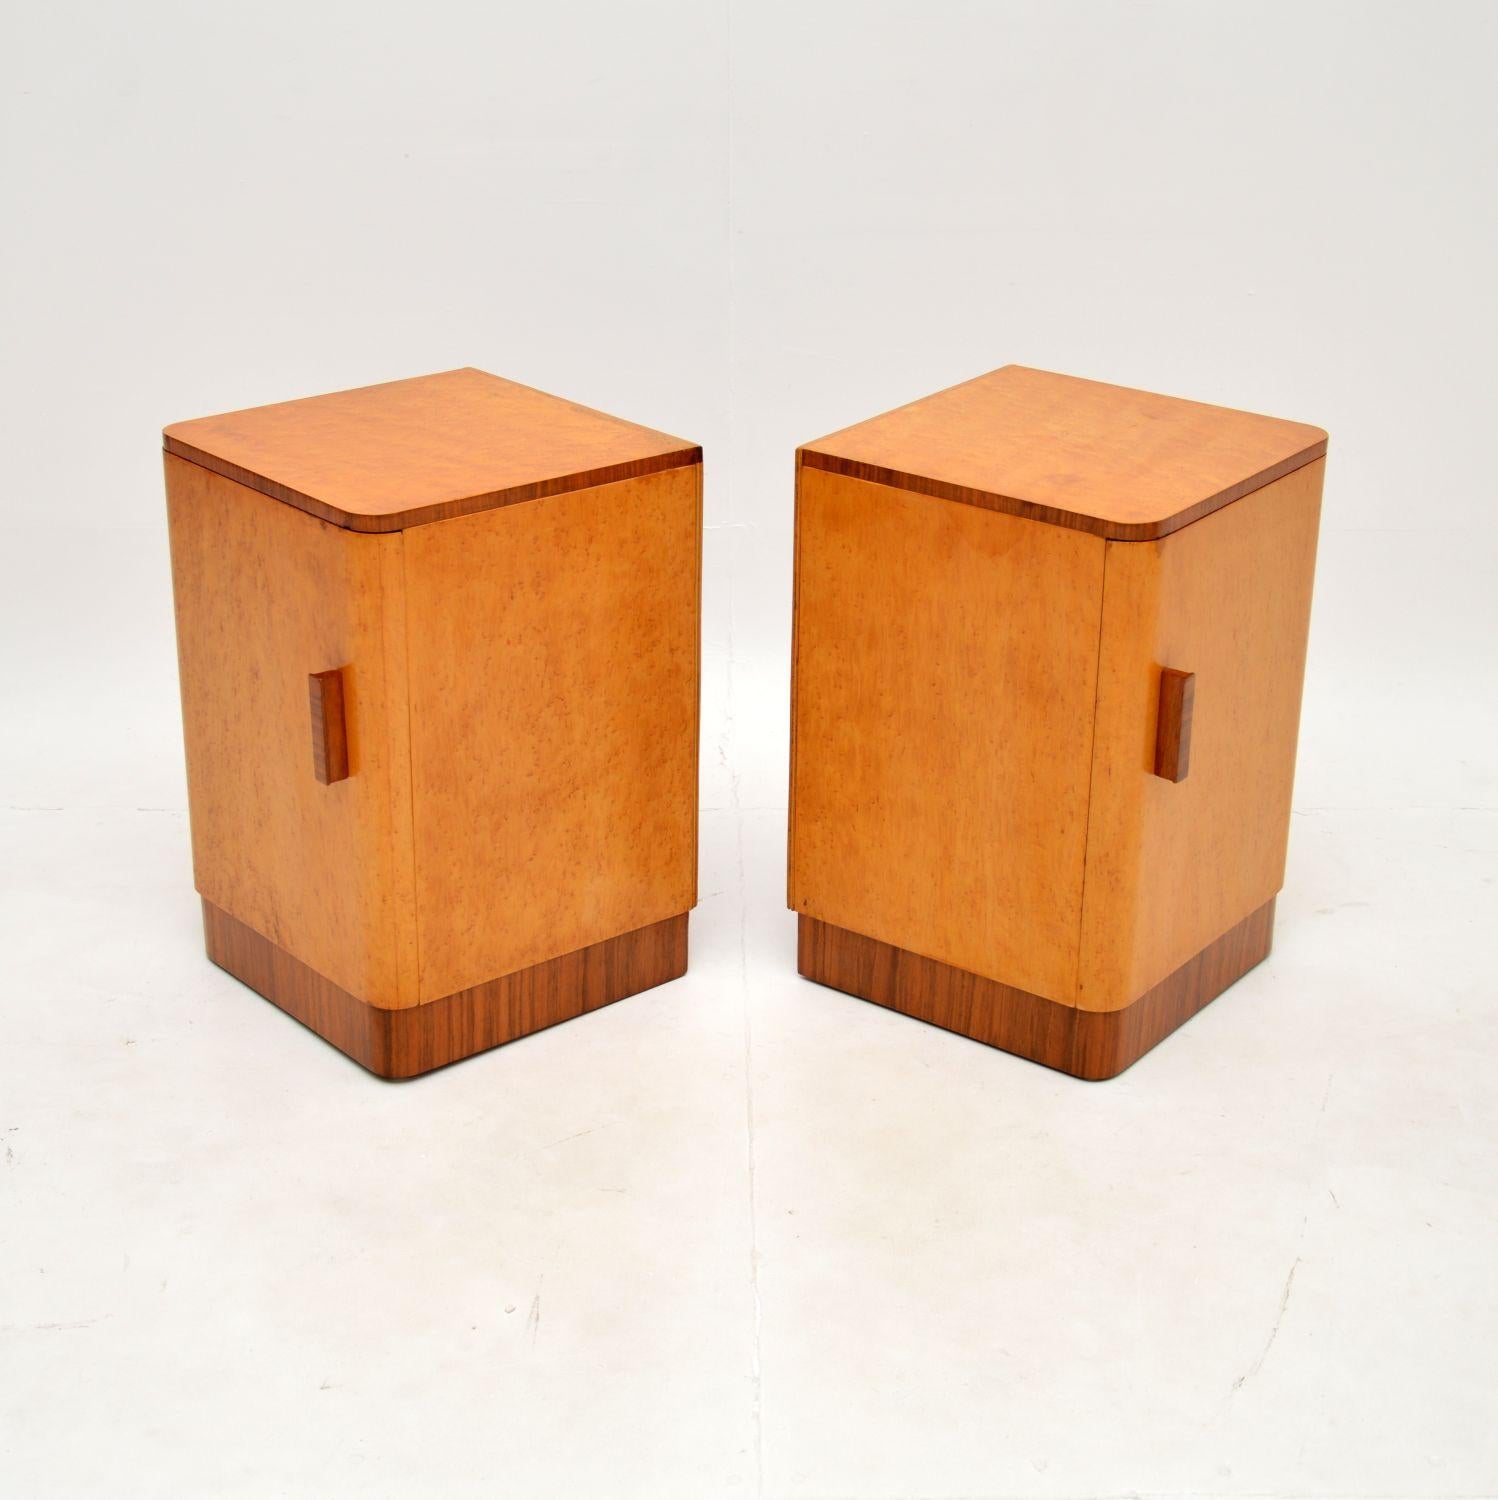 British Pair of Art Deco Bedside Cabinets in Birds Eye Maple and Walnut